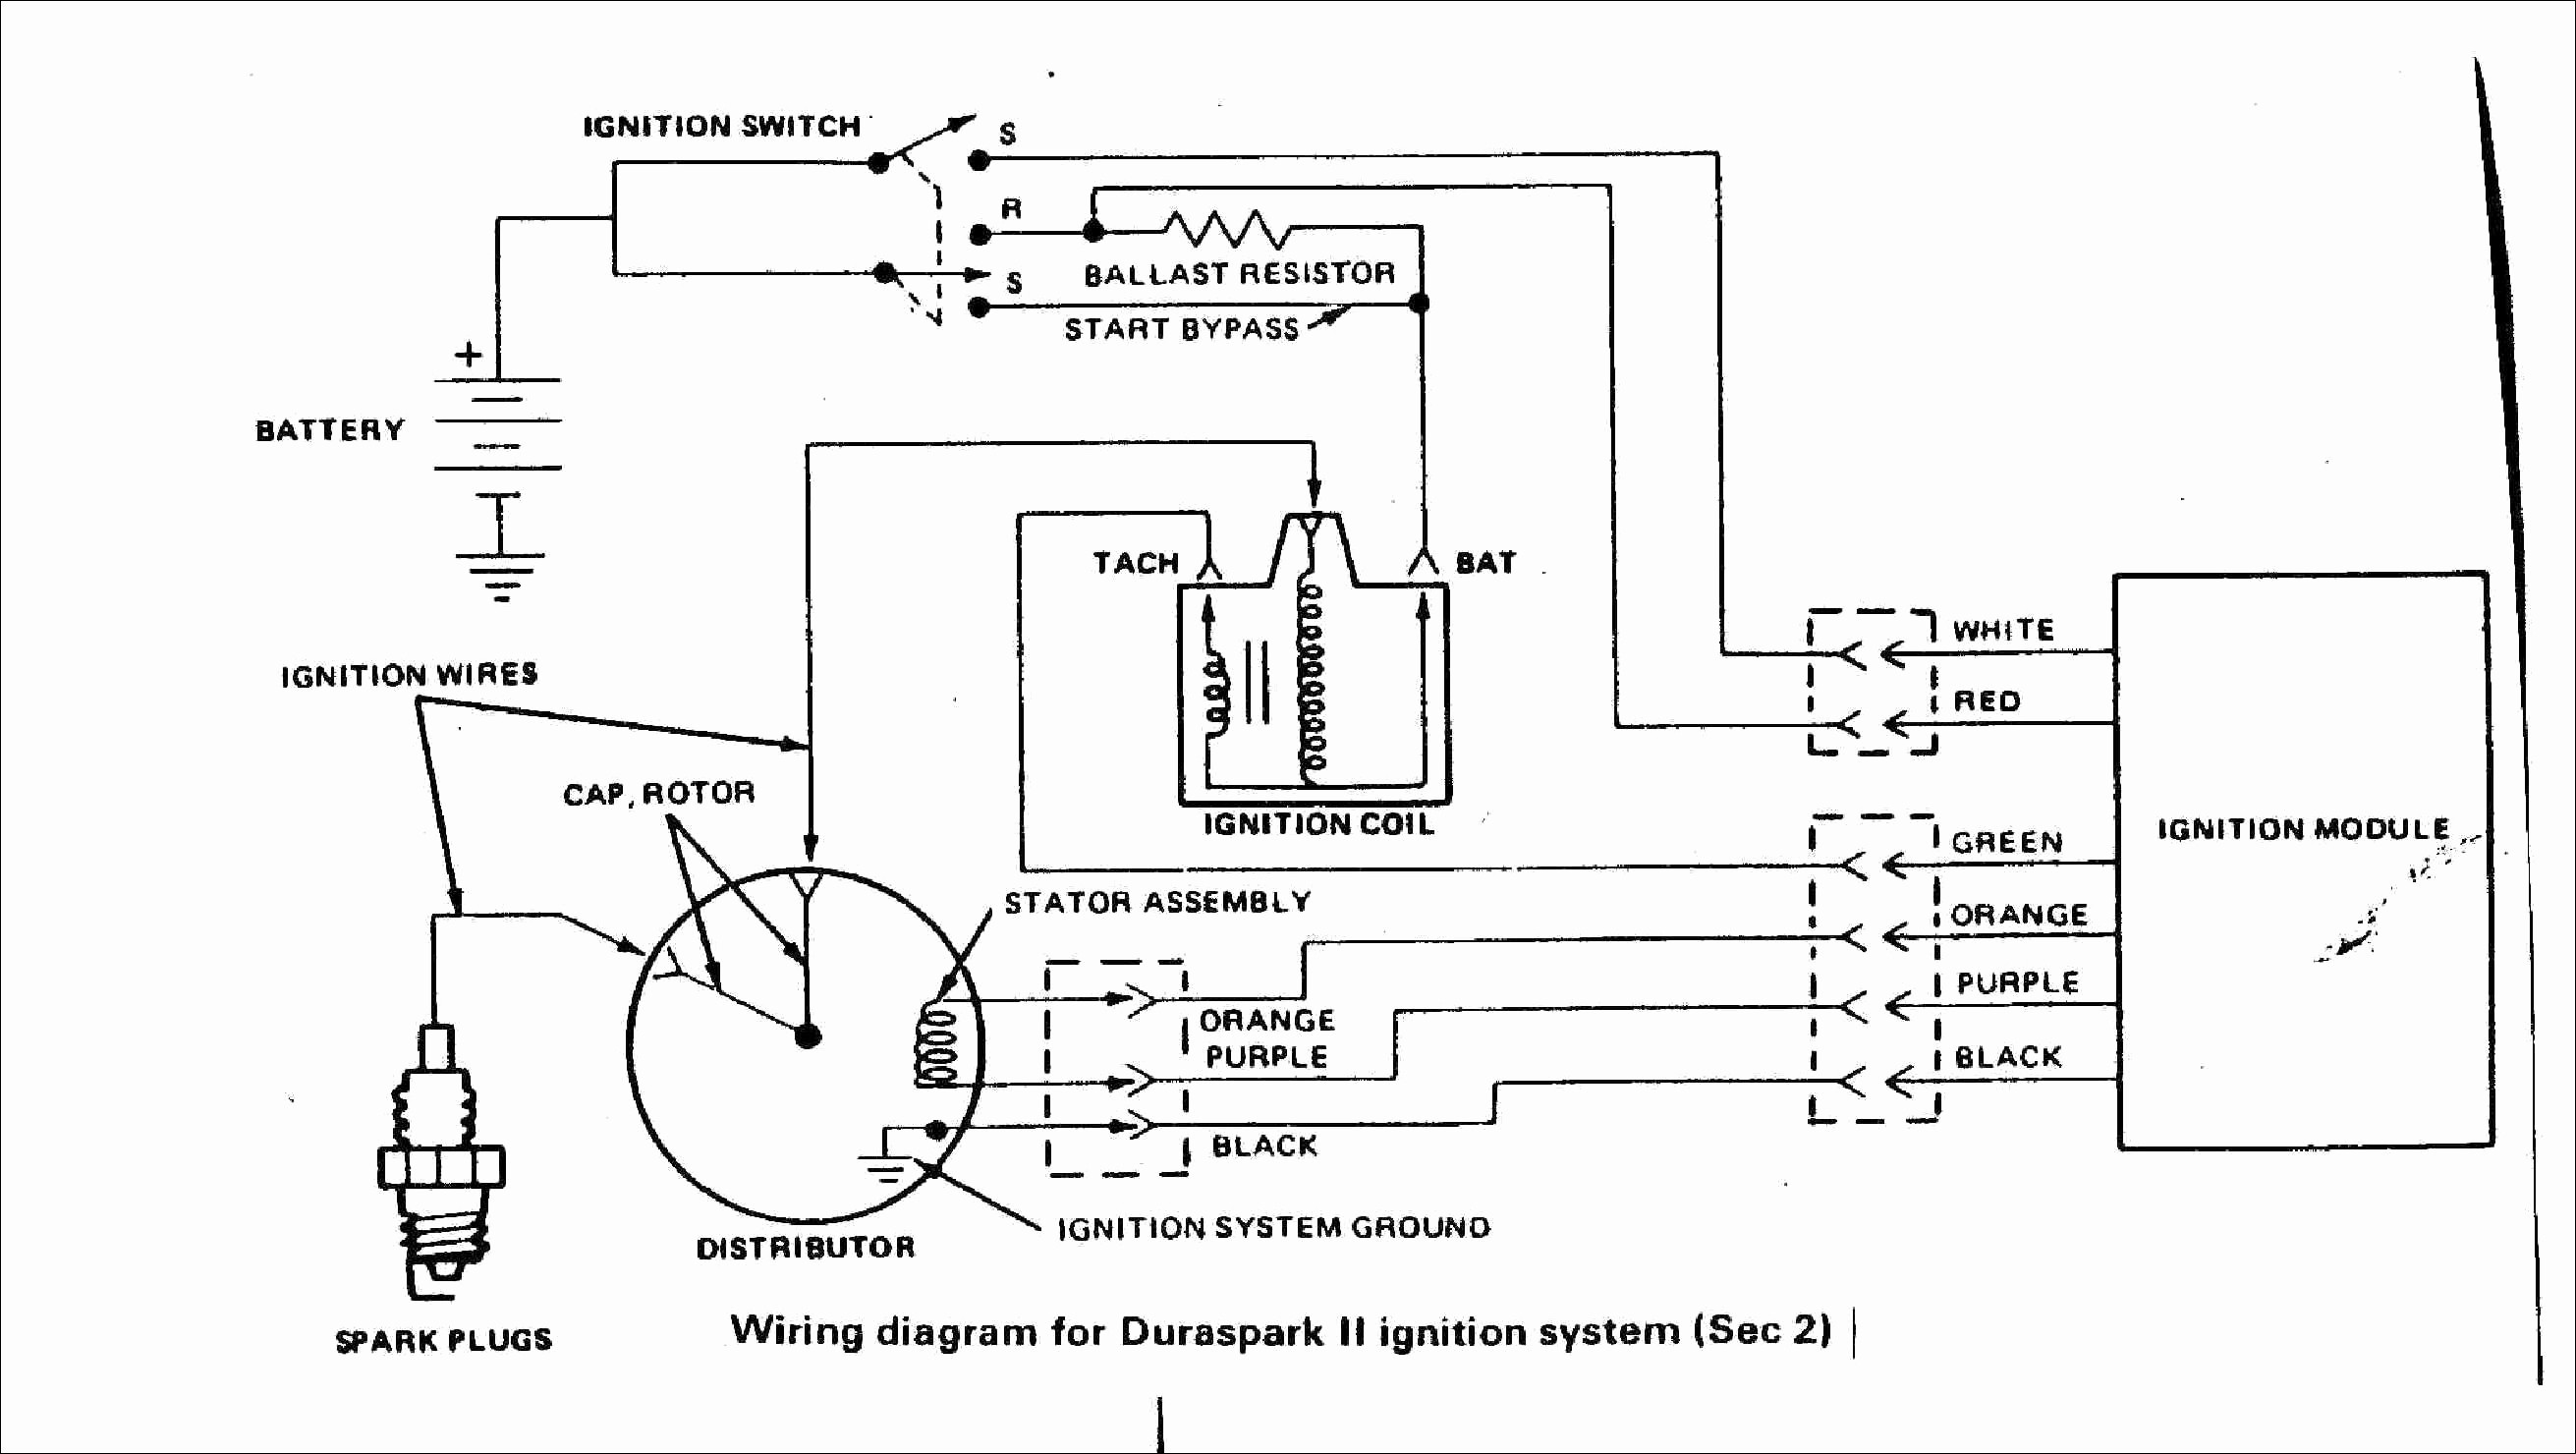 Champion Winch Wiring Diagram Tractor Ignition Switch Wiring Diagram 2018 3 Position Ignition Of Champion Winch Wiring Diagram